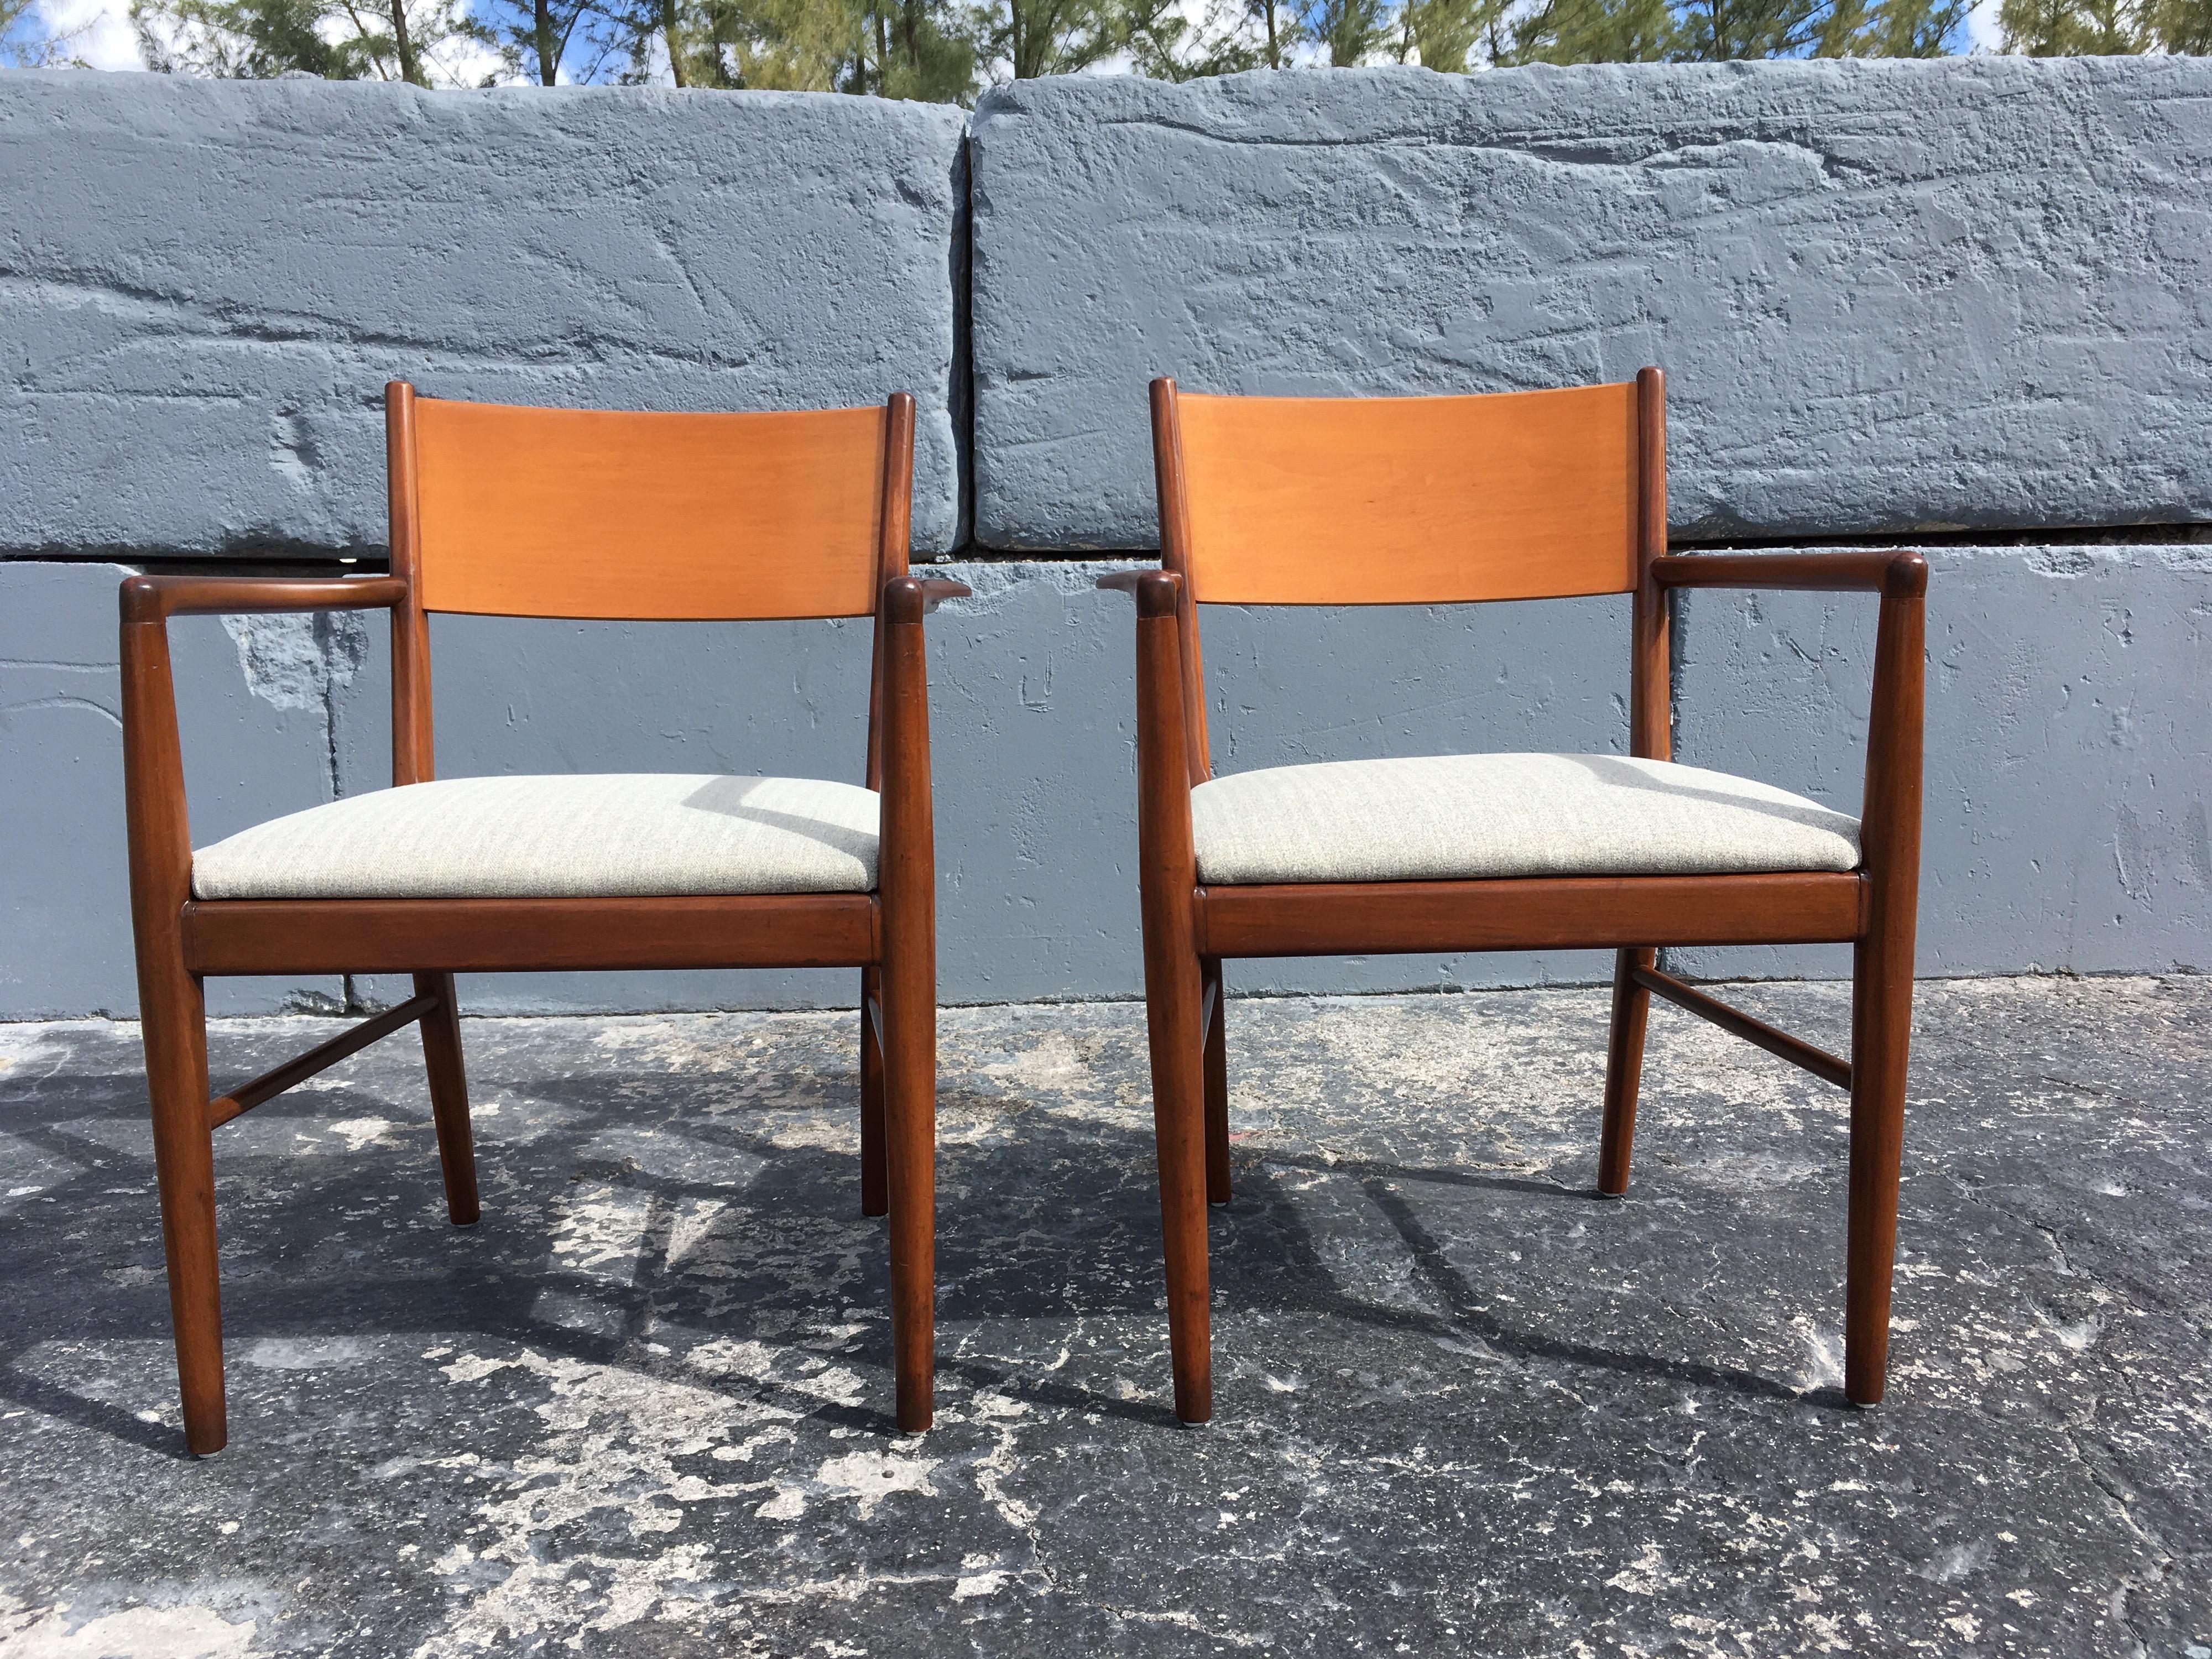 Great chairs in the style of Finn Juhl. Arm height is 25.25”.